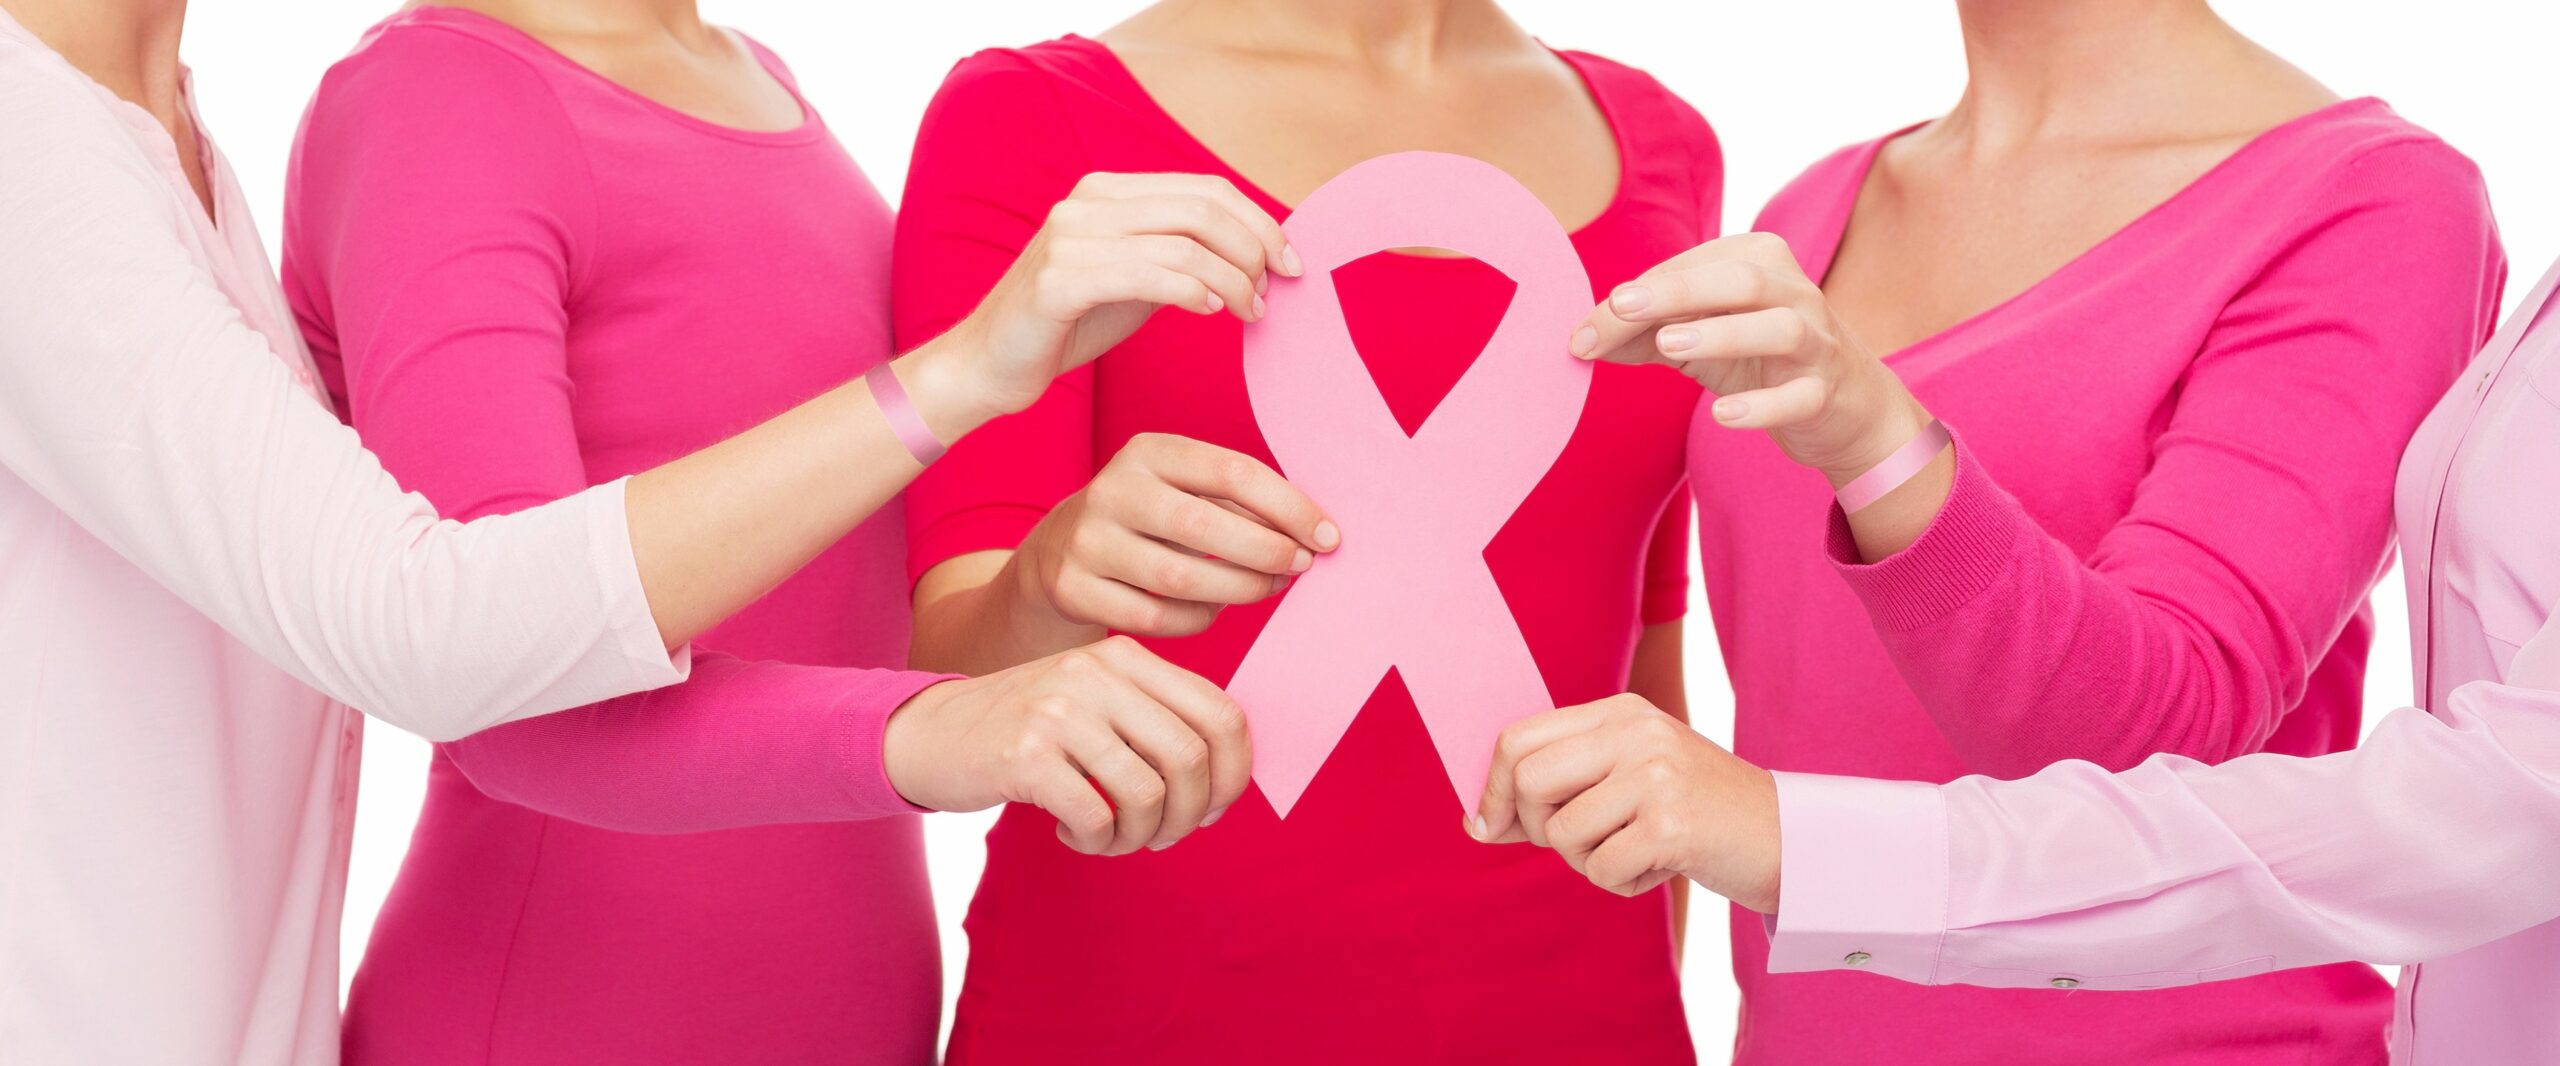 BREAST CANCER - WHAT ARE THE MOST EASILY MISSED SYMPTOMS?